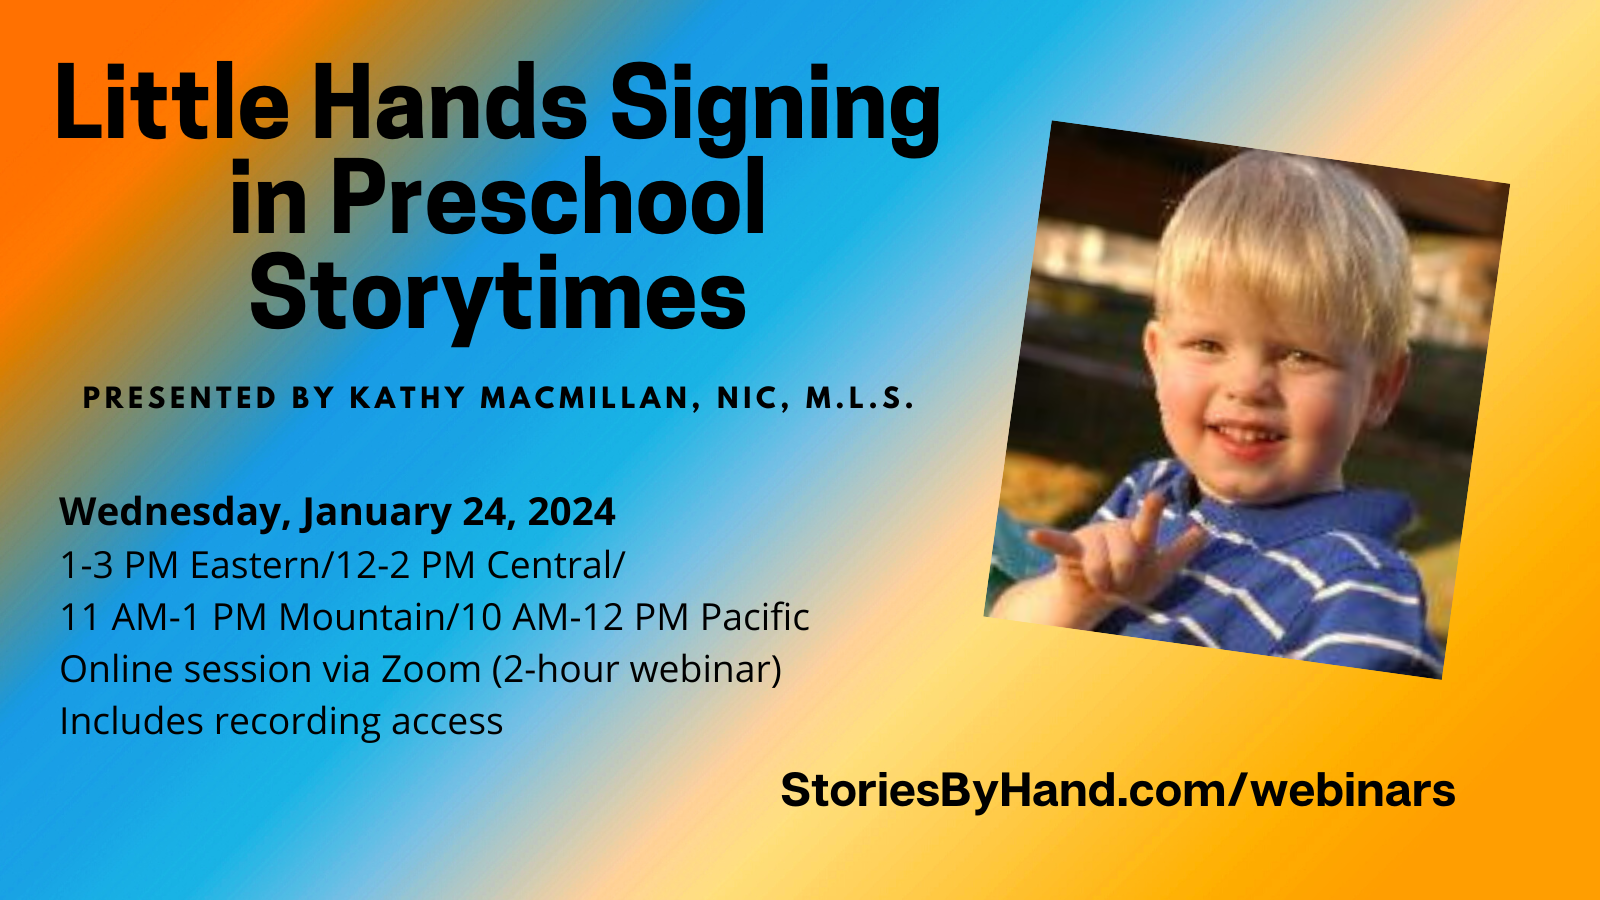 A blonde toddler in a blue striped shirt signs I-LOVE-YOU in American Sign Language. Text appears against a rainbow background: Little Hands Signing in Preschool Storytime Wednesday, January 24, 2024. 1-3 PM Eastern/12-2 PM Central/11 AM-1 PM Mountain/10 AM-12 PM Pacific. Online session via Zoom (2-hour webinar). Includes recording access. Presented by Kathy MacMillan, NIC, M.L.S. StoriesByHand.com/webinars. 